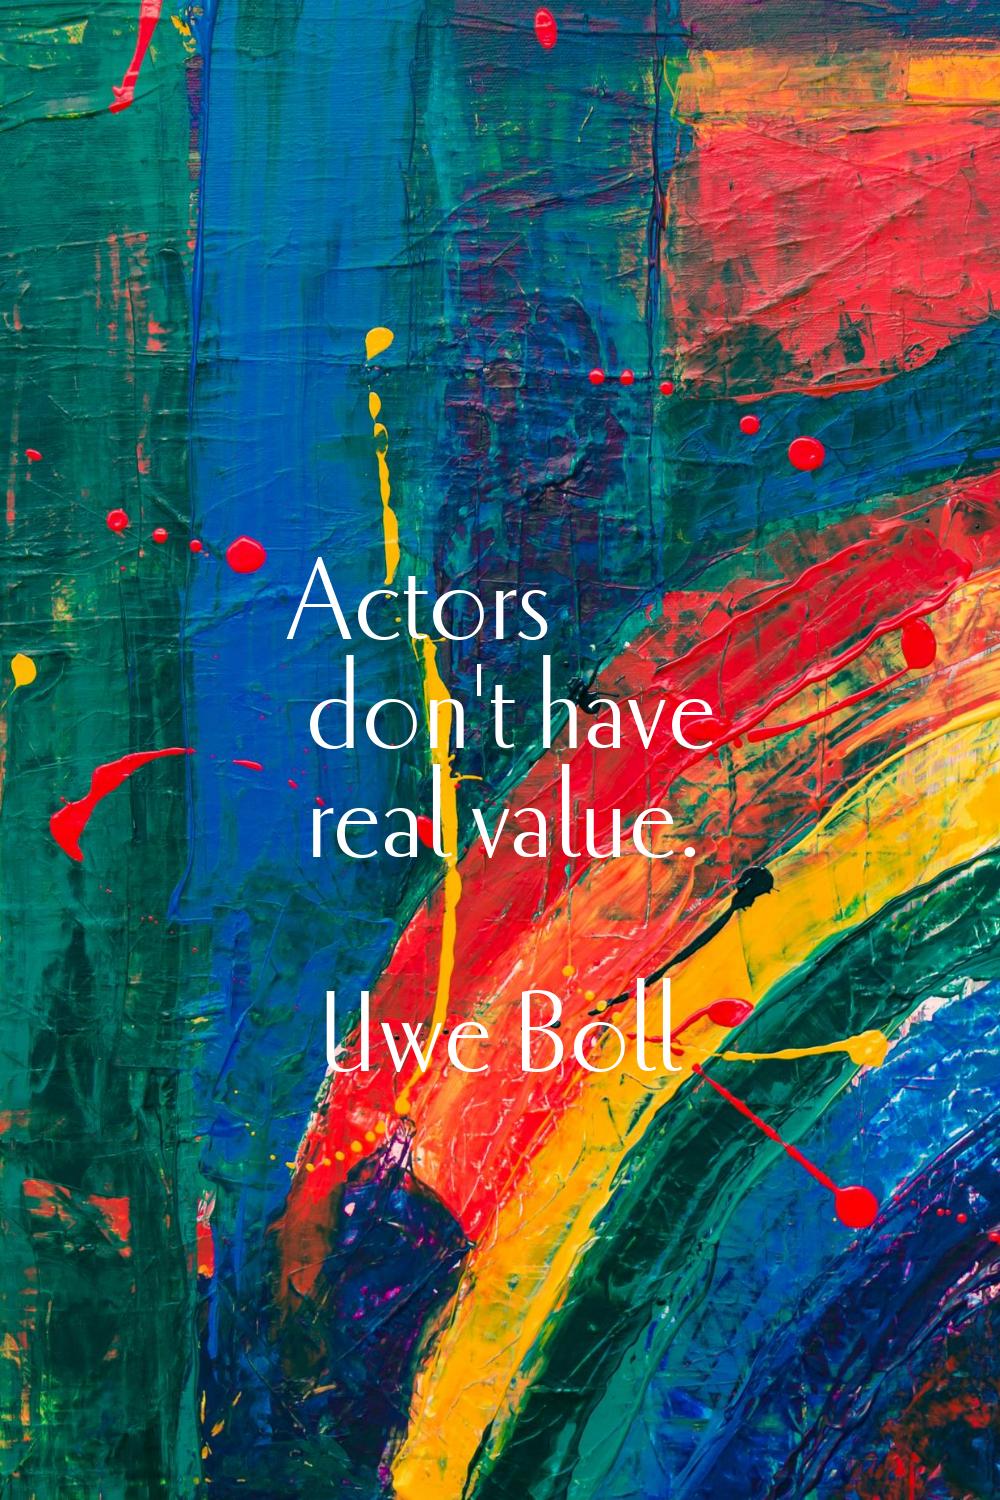 Actors don't have real value.